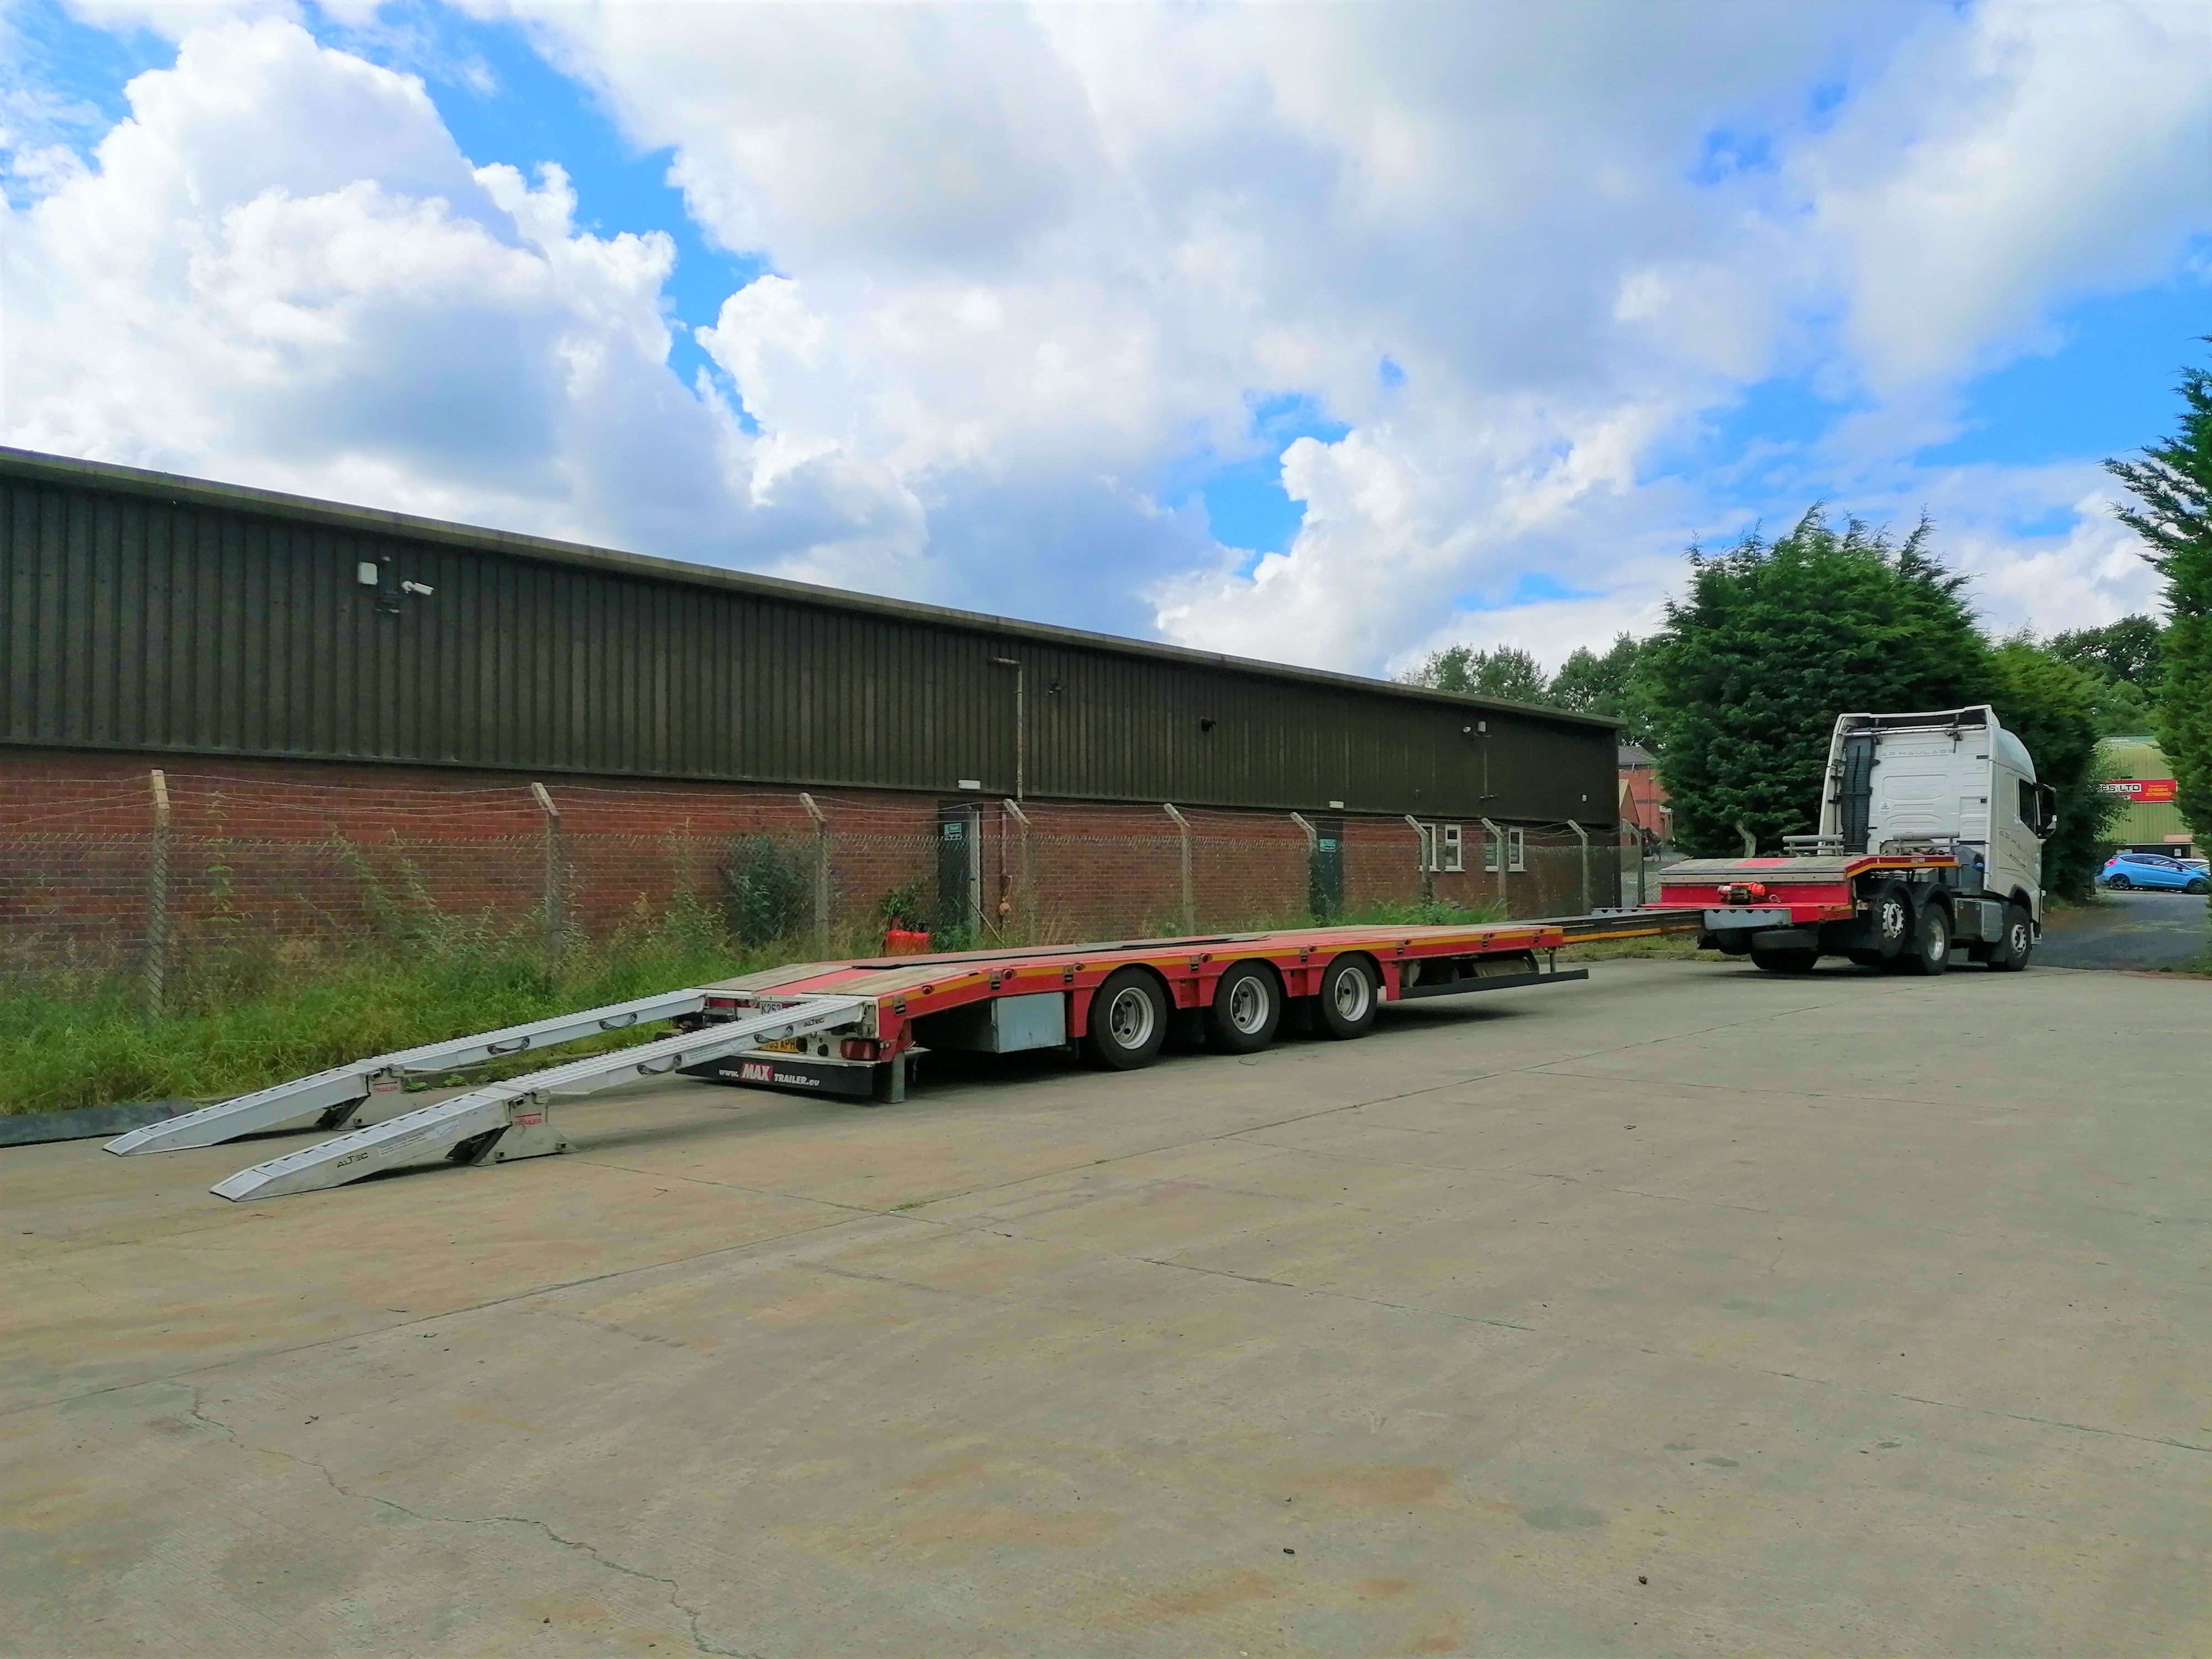 Articulated lorry lowloader ramps haulage